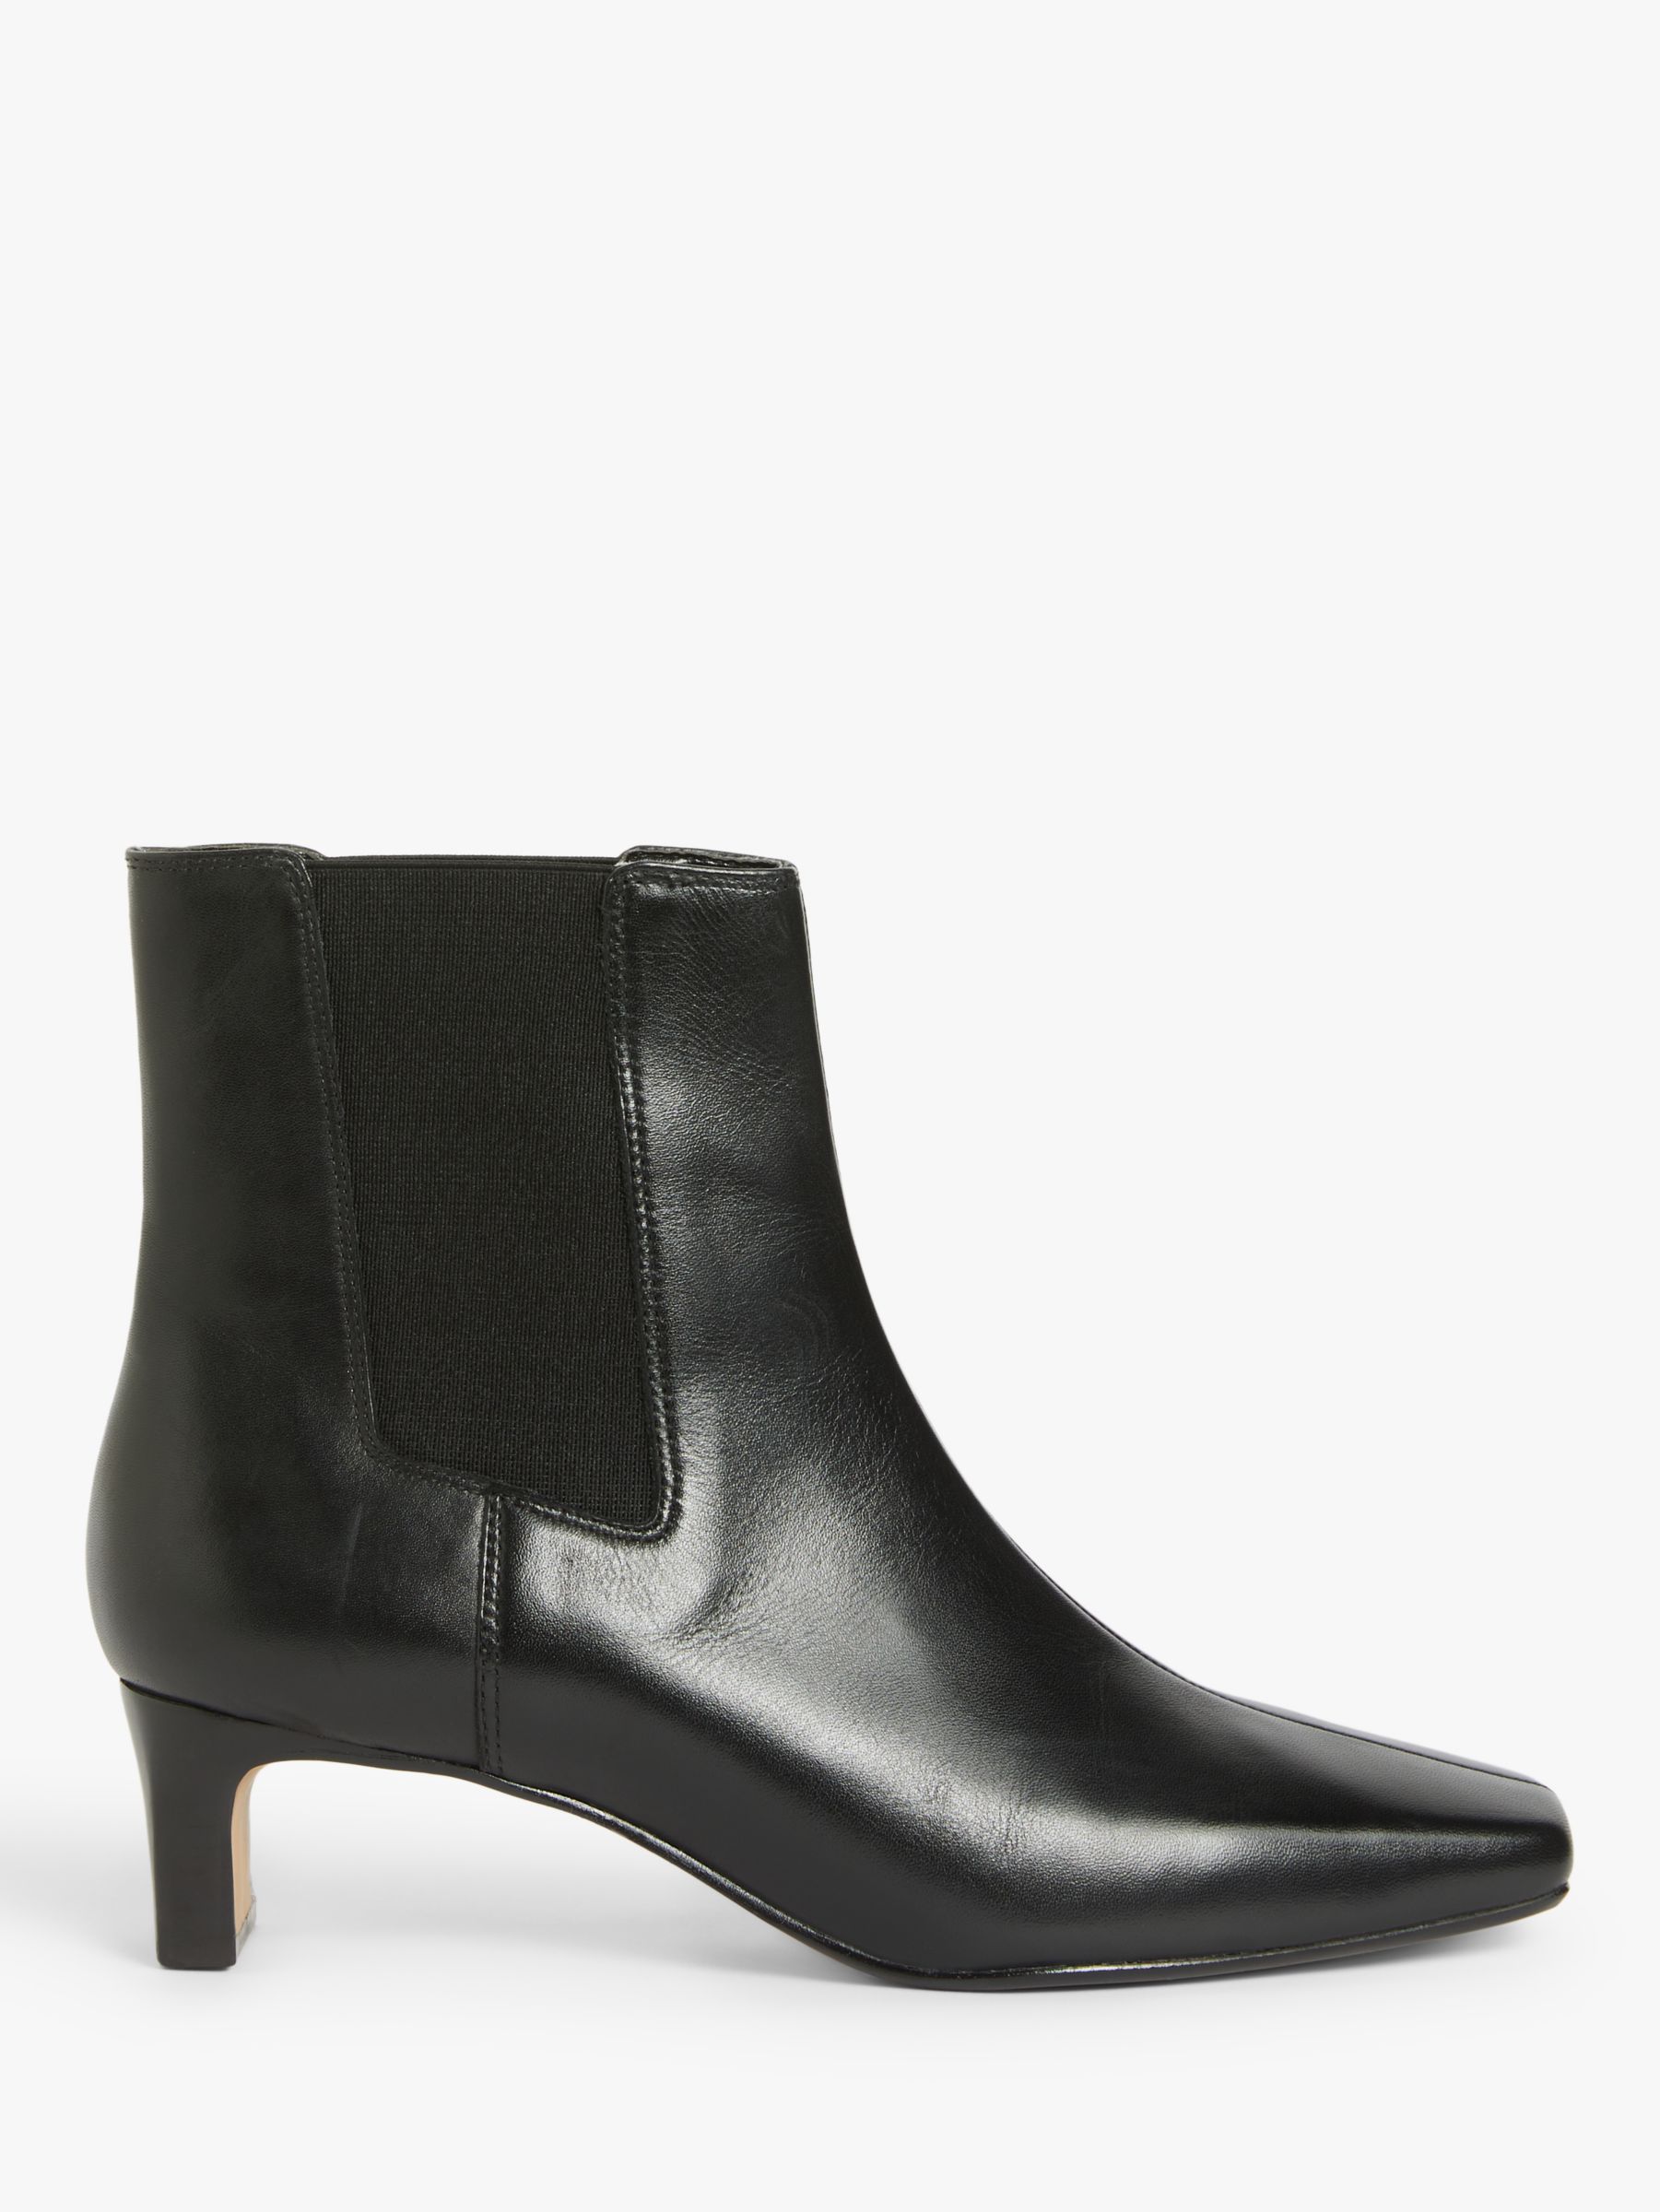 John Lewis Primmy Leather 90's Heel Ankle Boots